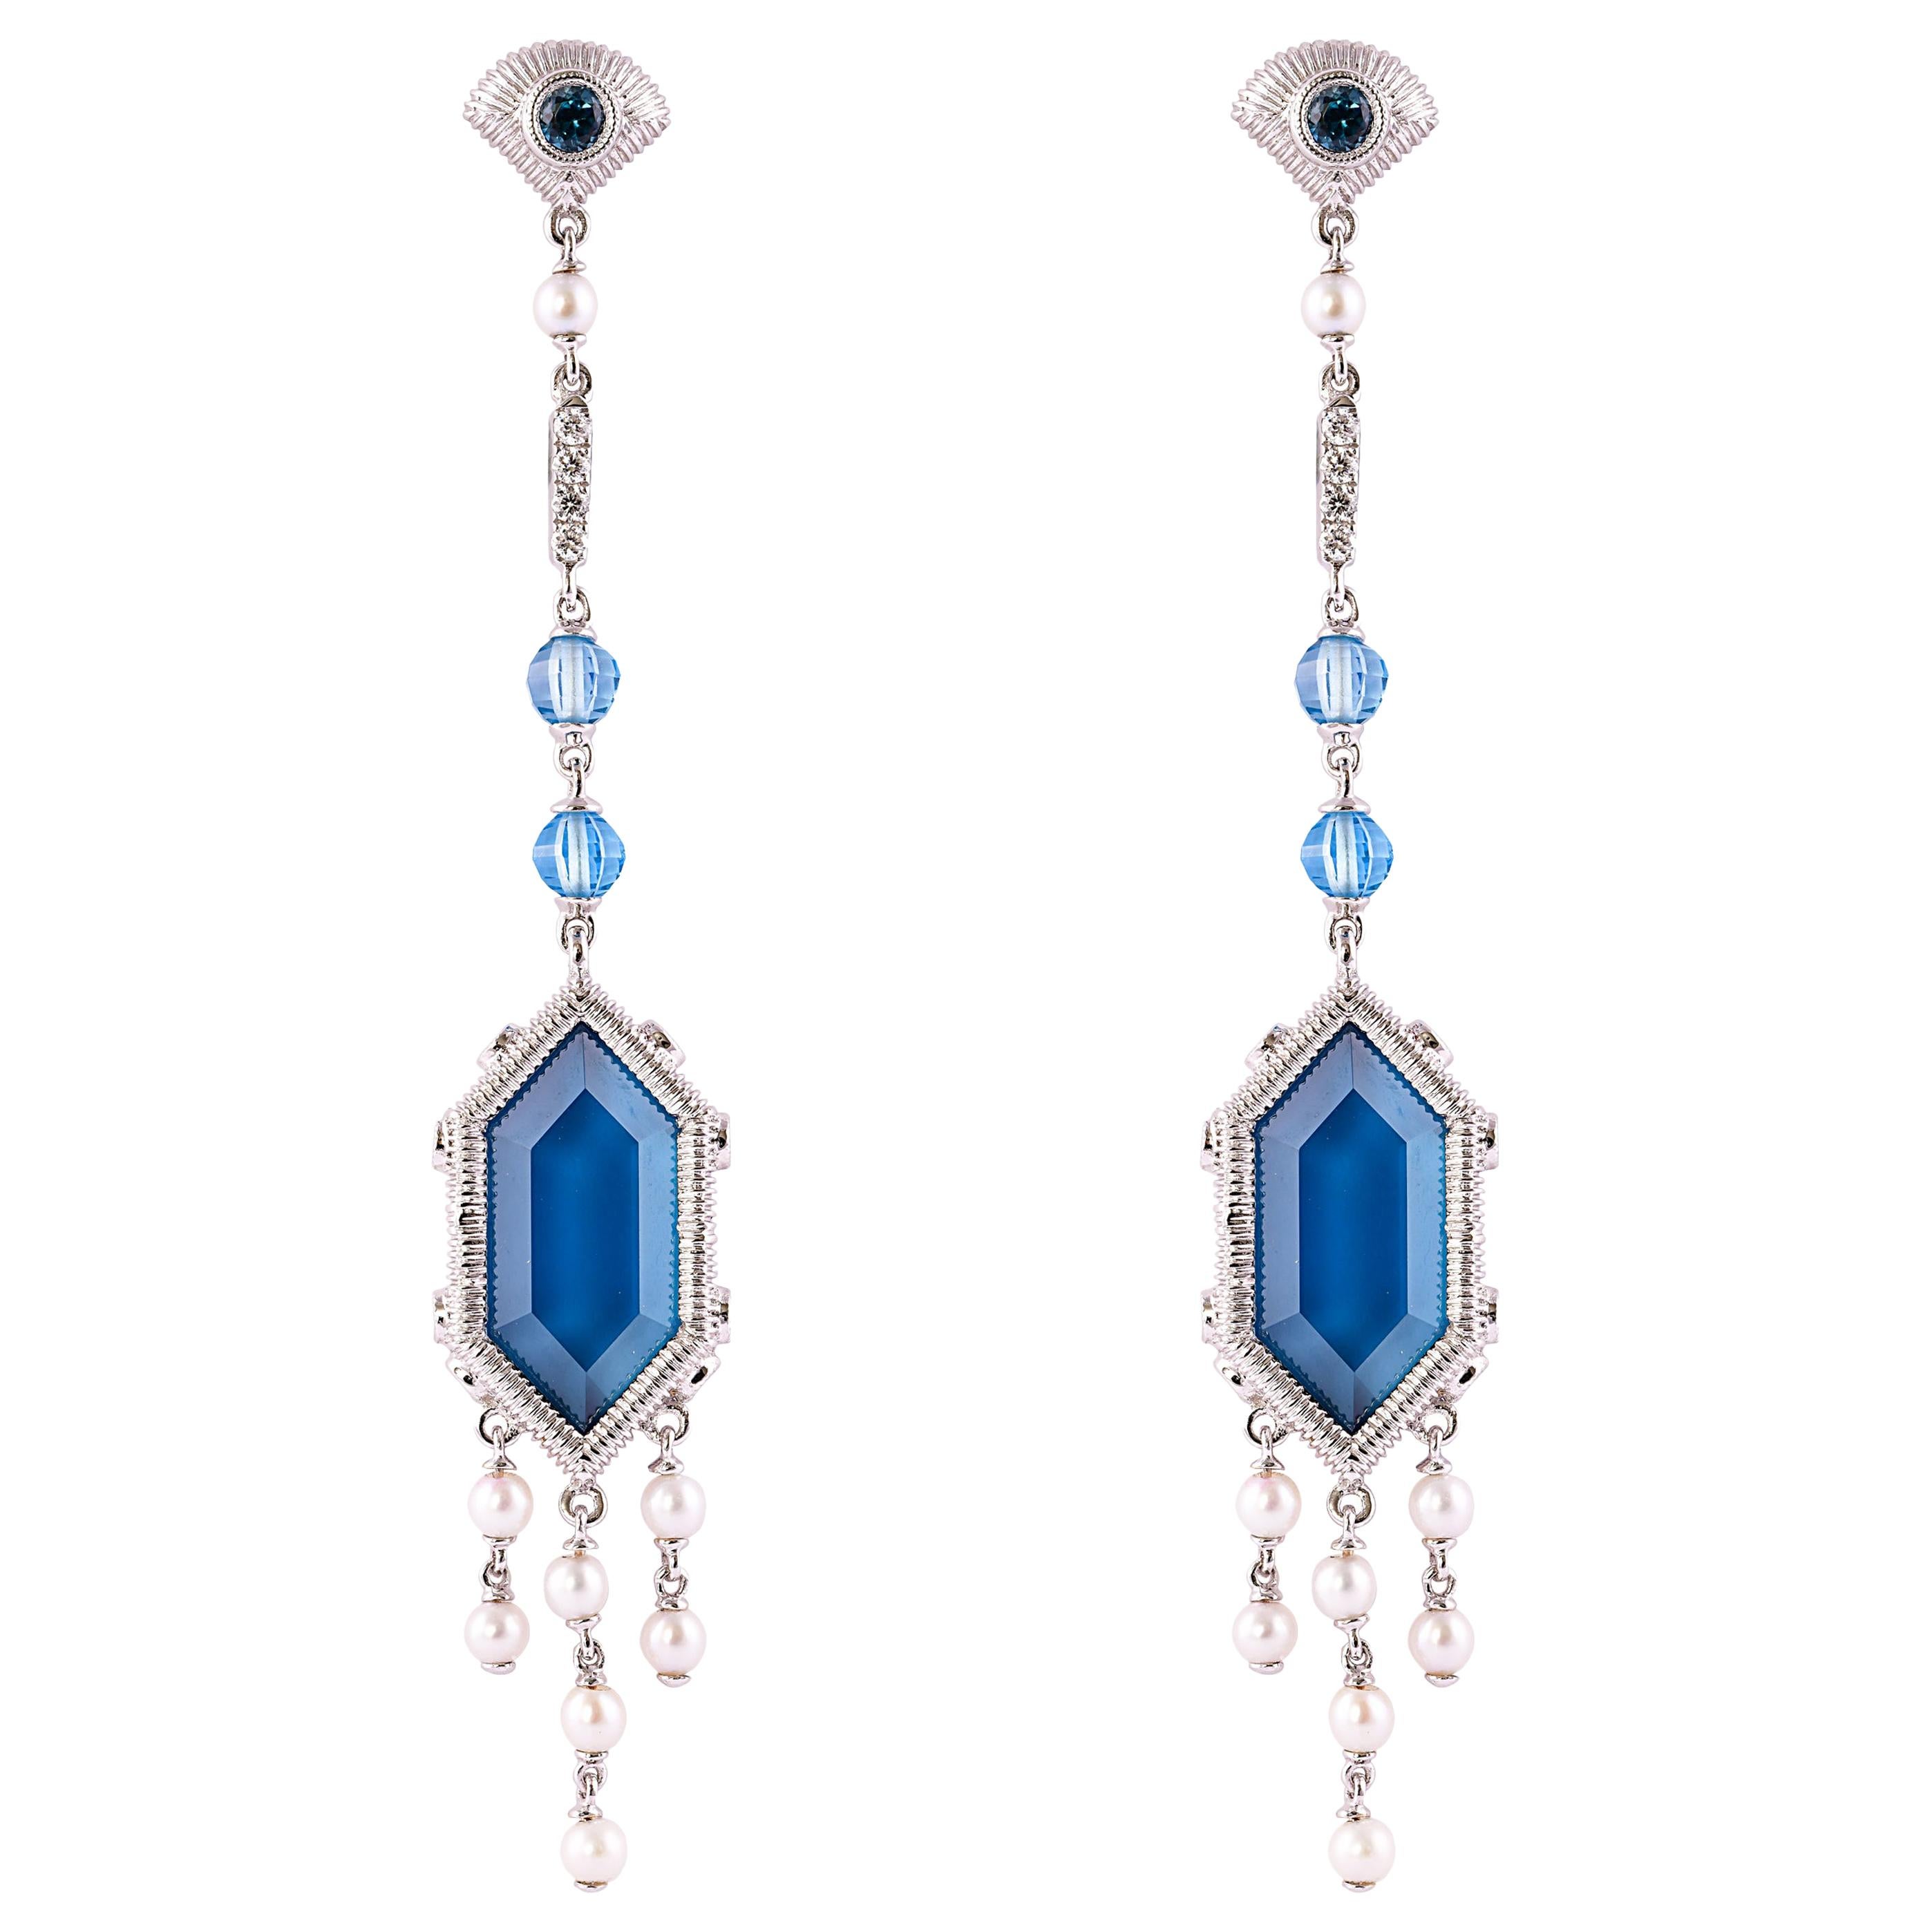 20 Carat London Blue Topaz Earring in 18 Karat Gold with Diamonds and Pearls For Sale